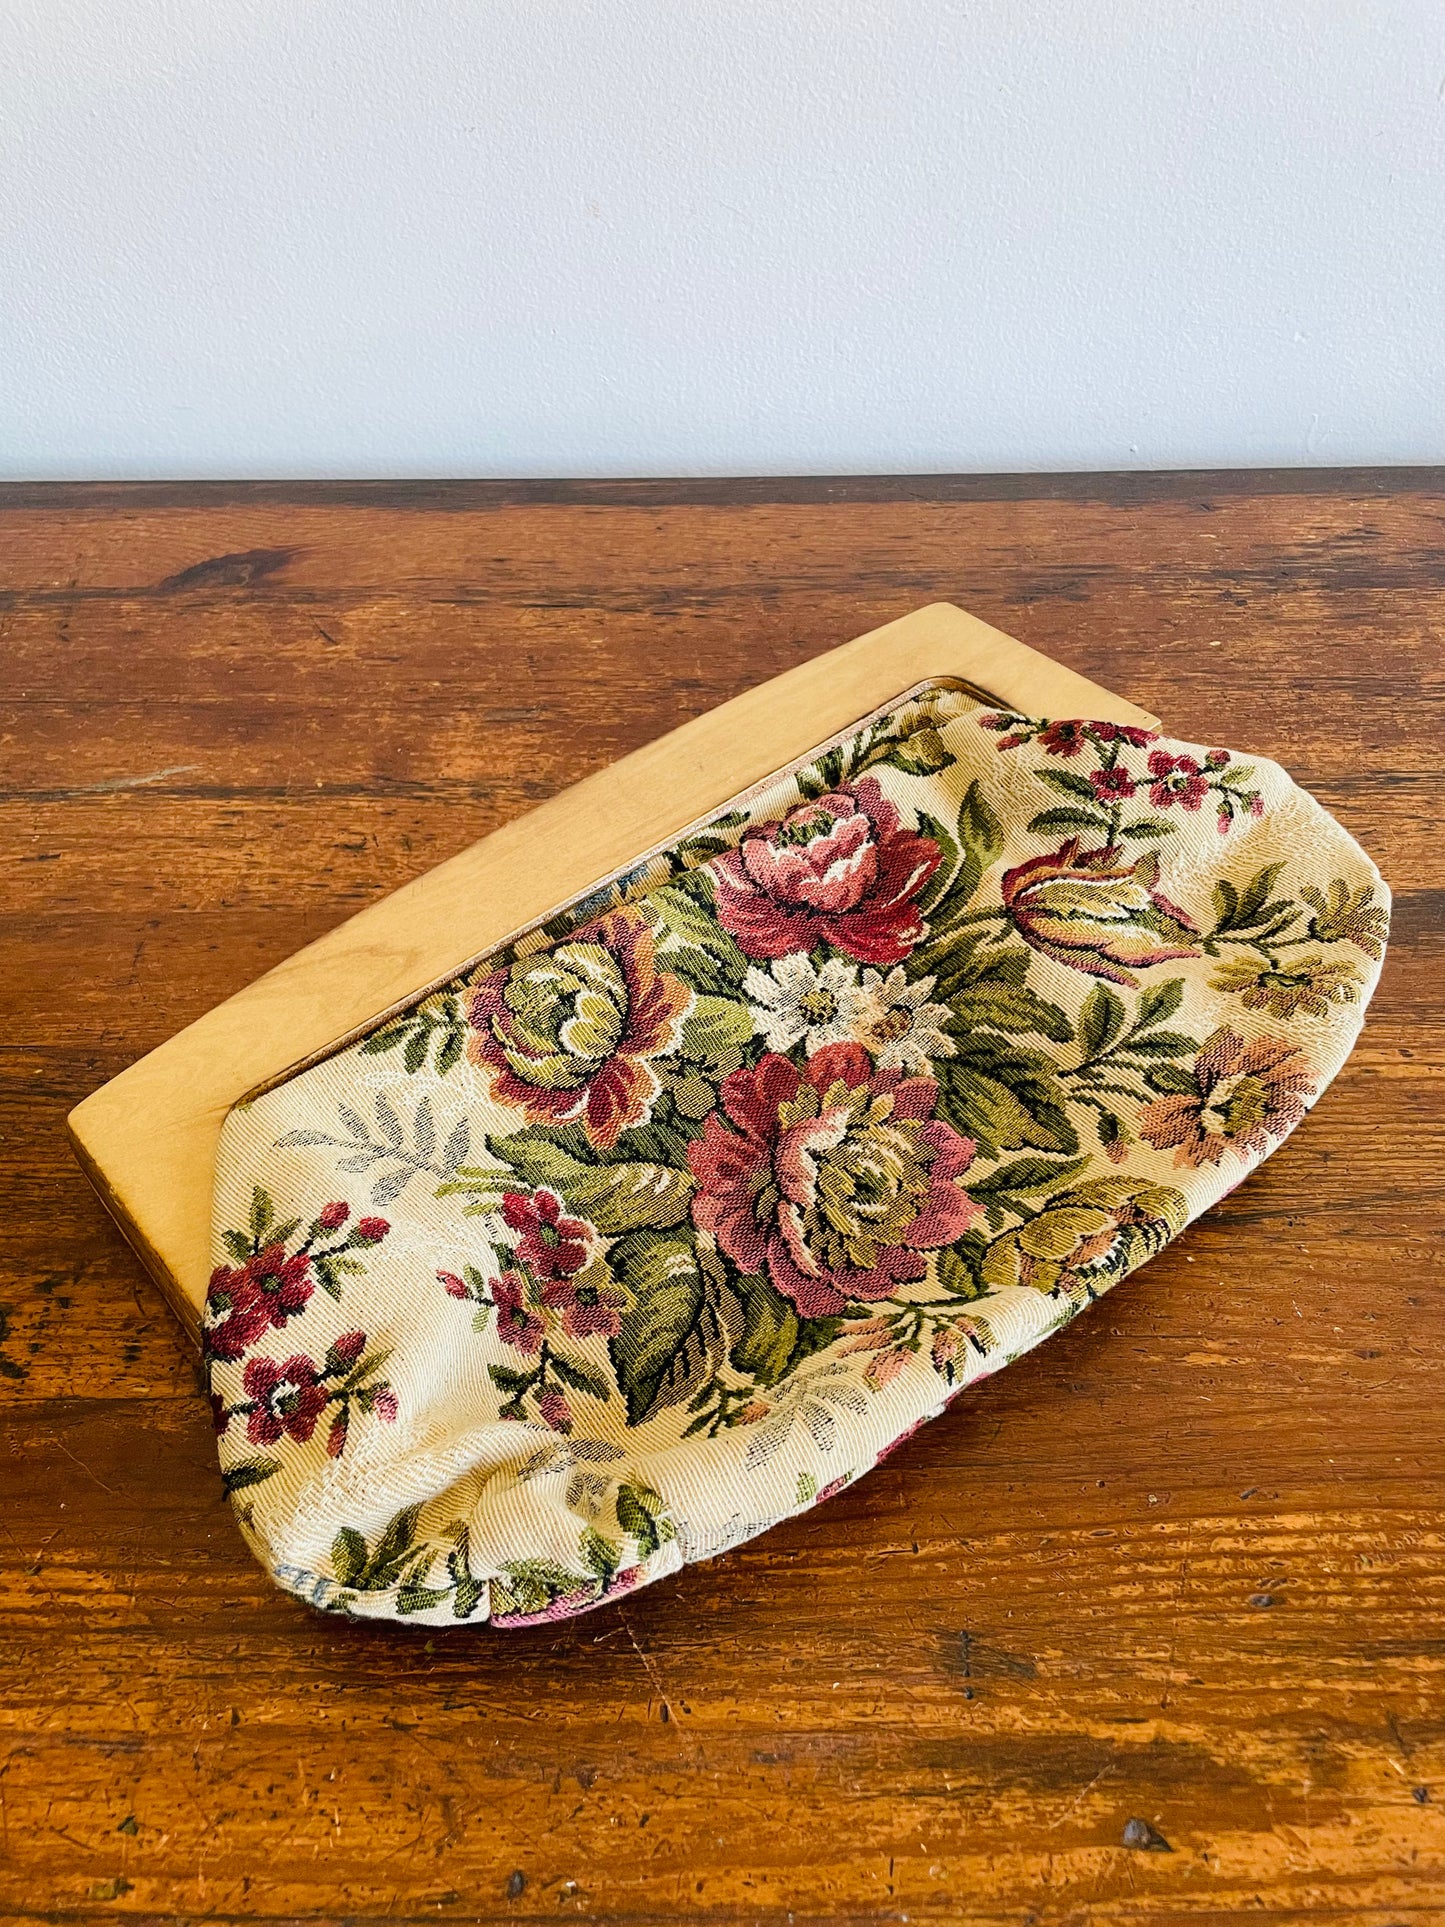 Wood & Floral Tapestry Fabric Clutch Purse with Magnetic Clasp